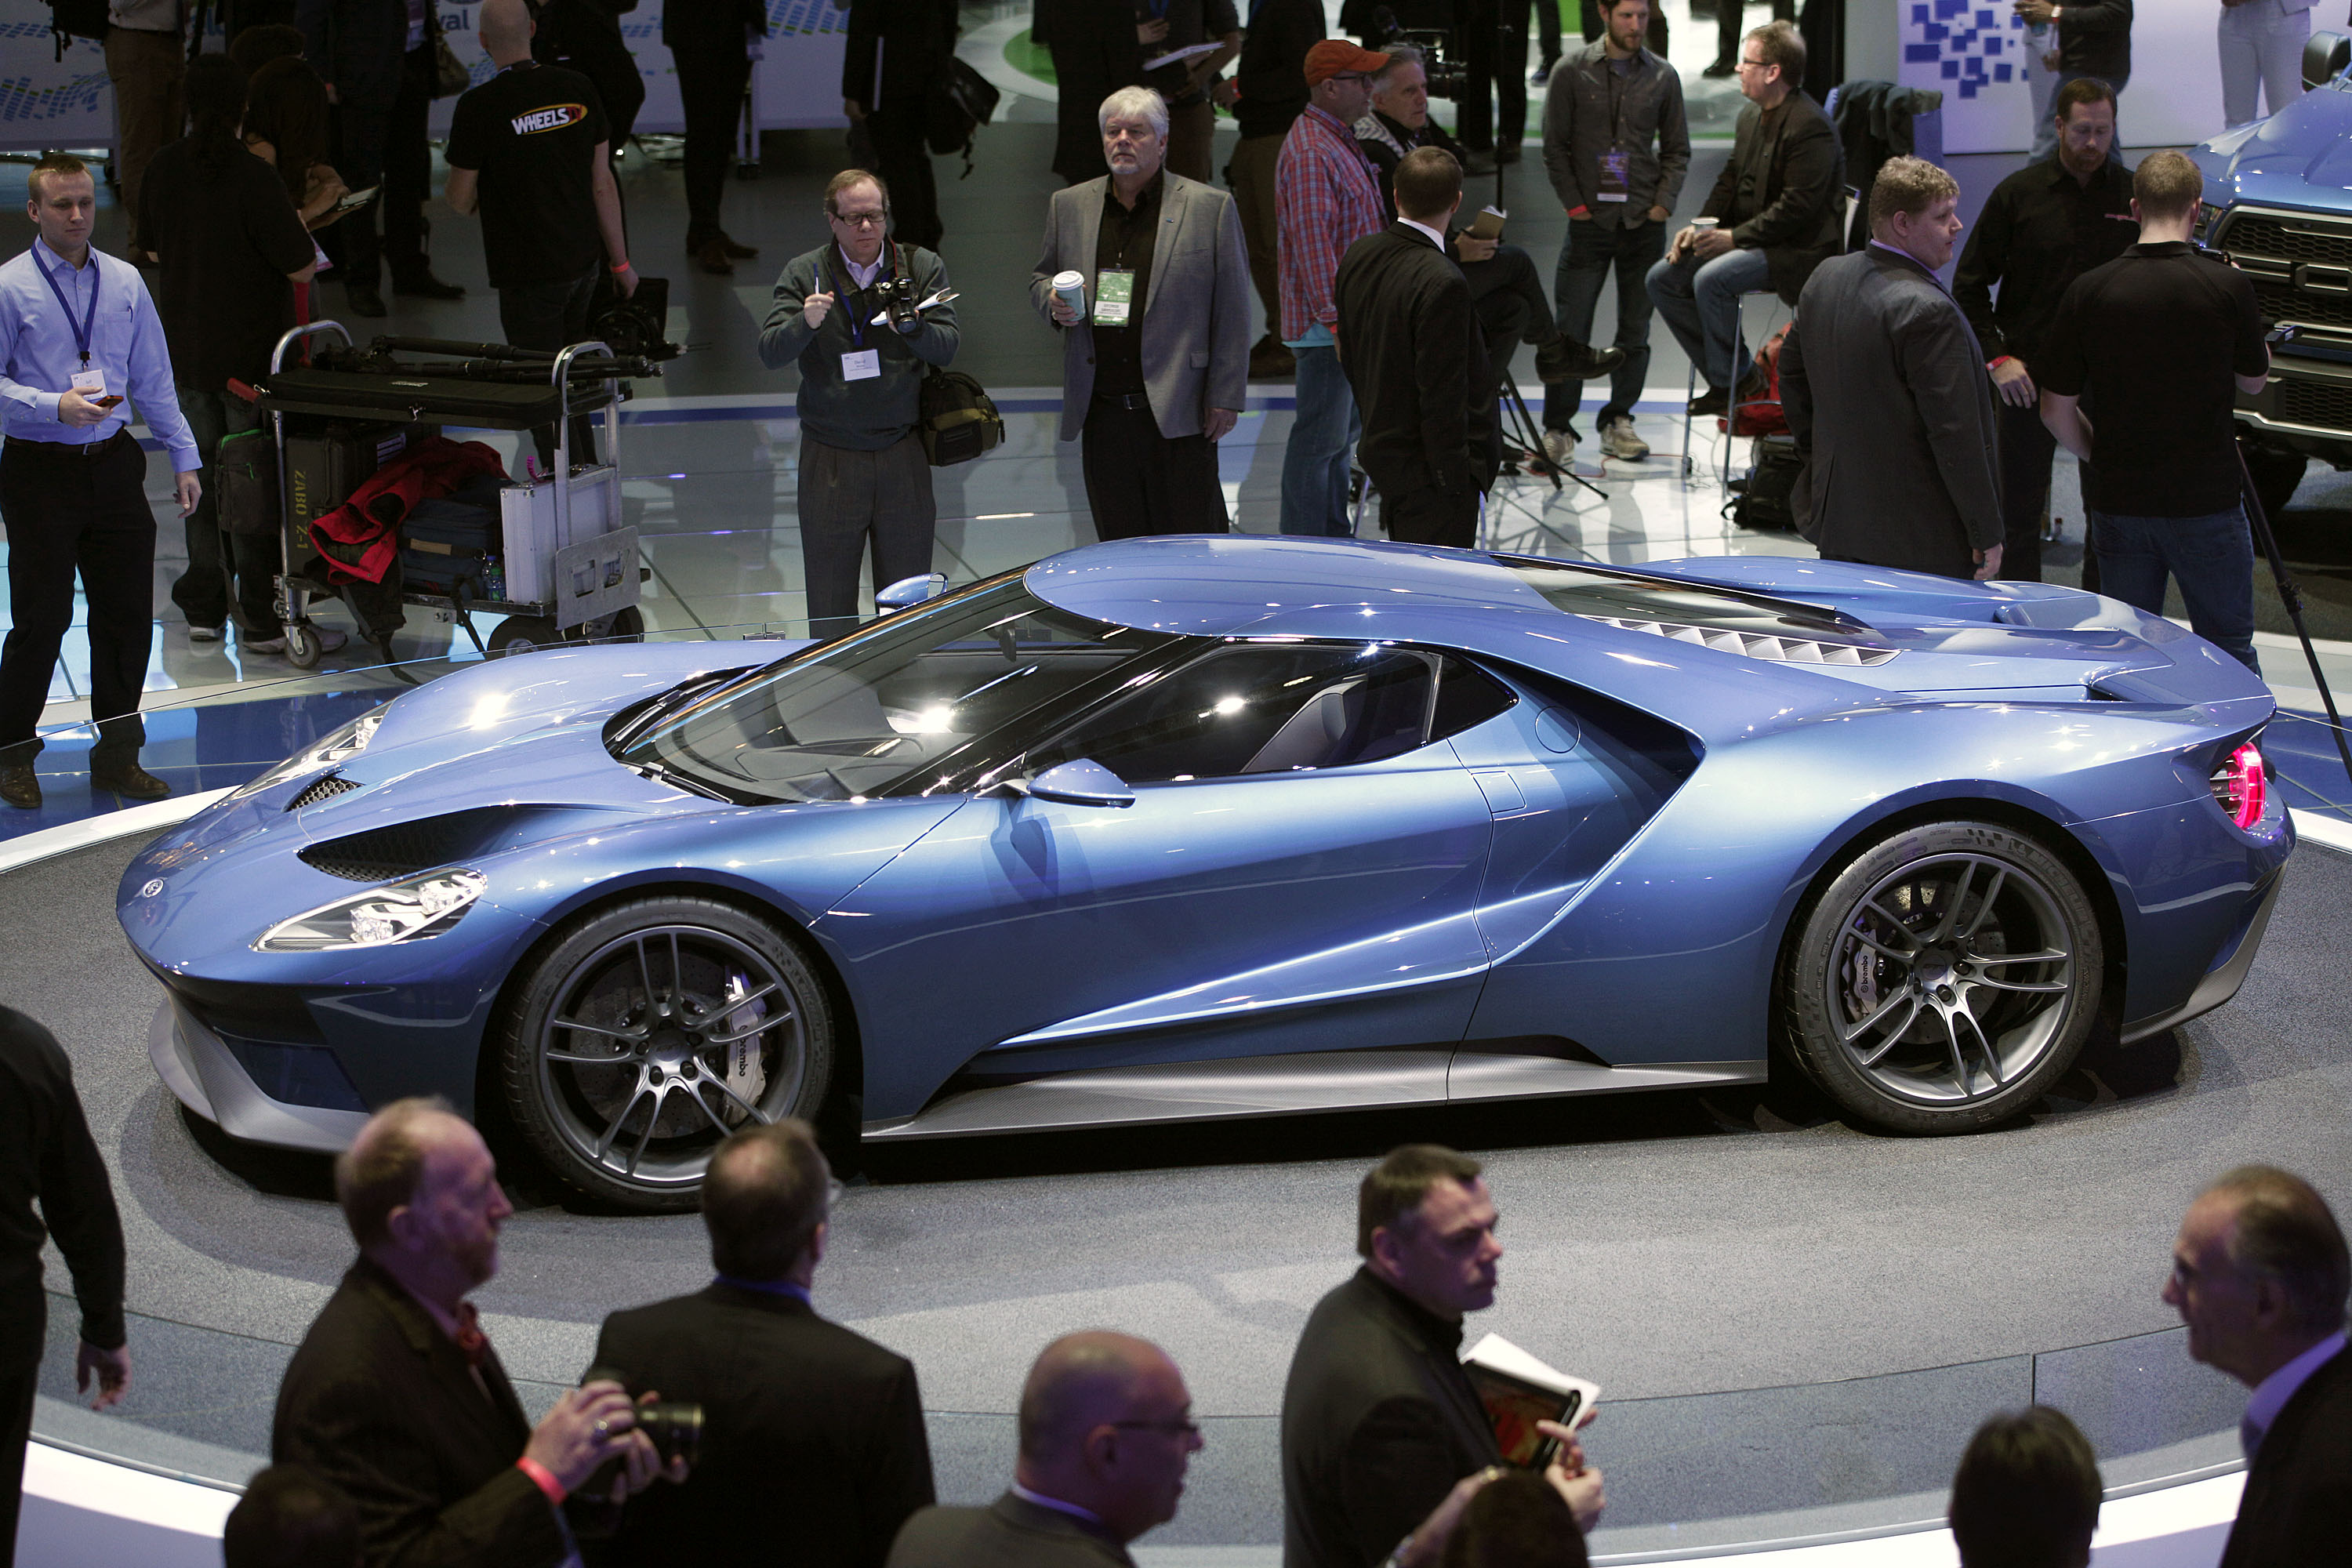 Comes in any color you want… as long as it's blue. (Photo by Bill Pugliano/Getty Images)